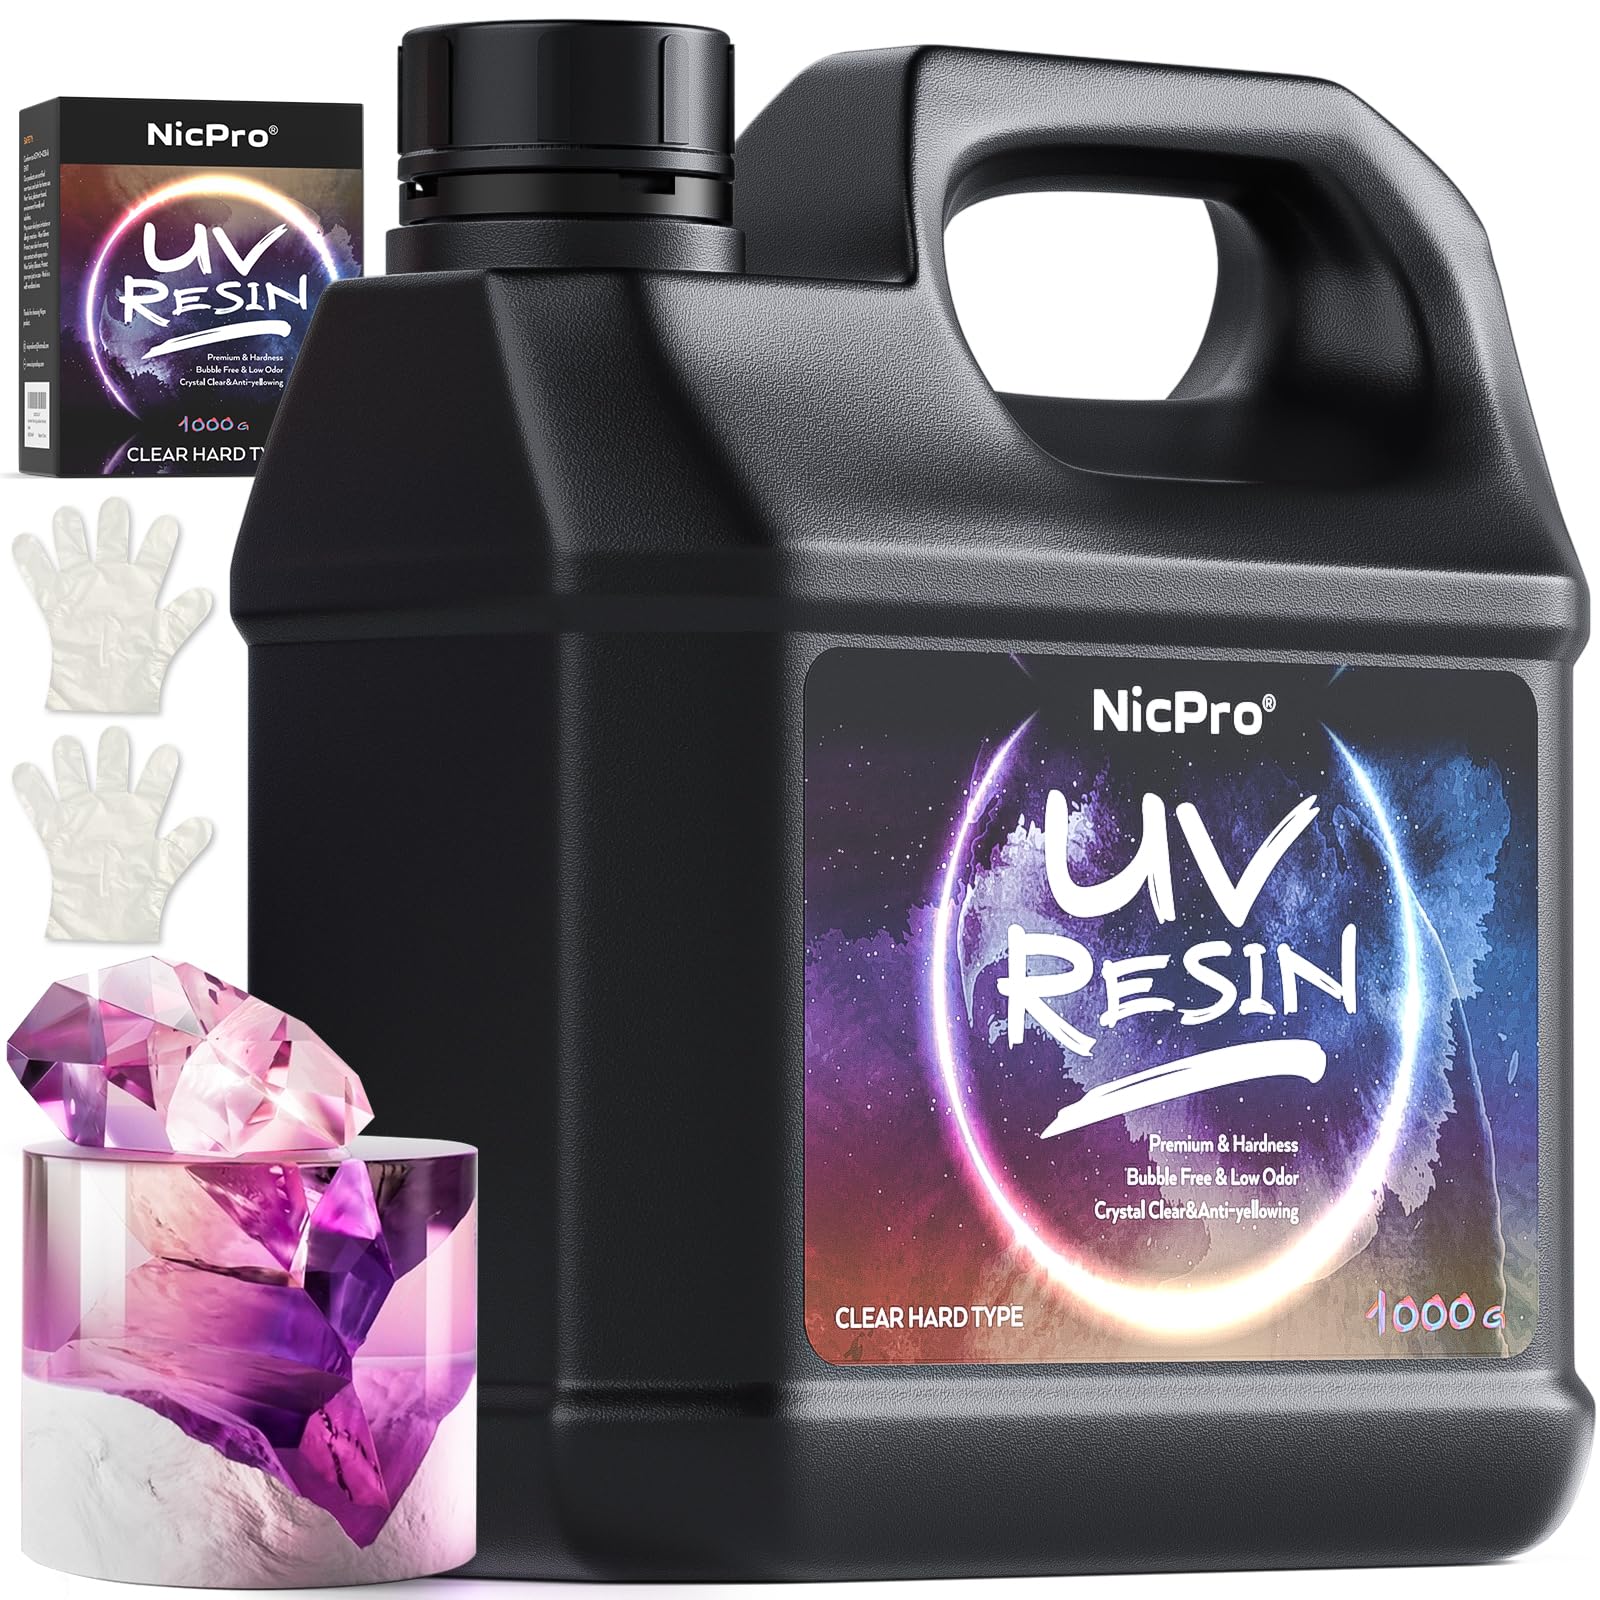 YIEHO 300g UV Resin Kit with Light-Upgraded Crystal Clear Hard UV Curing  Premixed Epoxy Resin Starter Supplies for Art Craft Beginner Jewelry Making  with Lamp : Buy Online at Best Price in